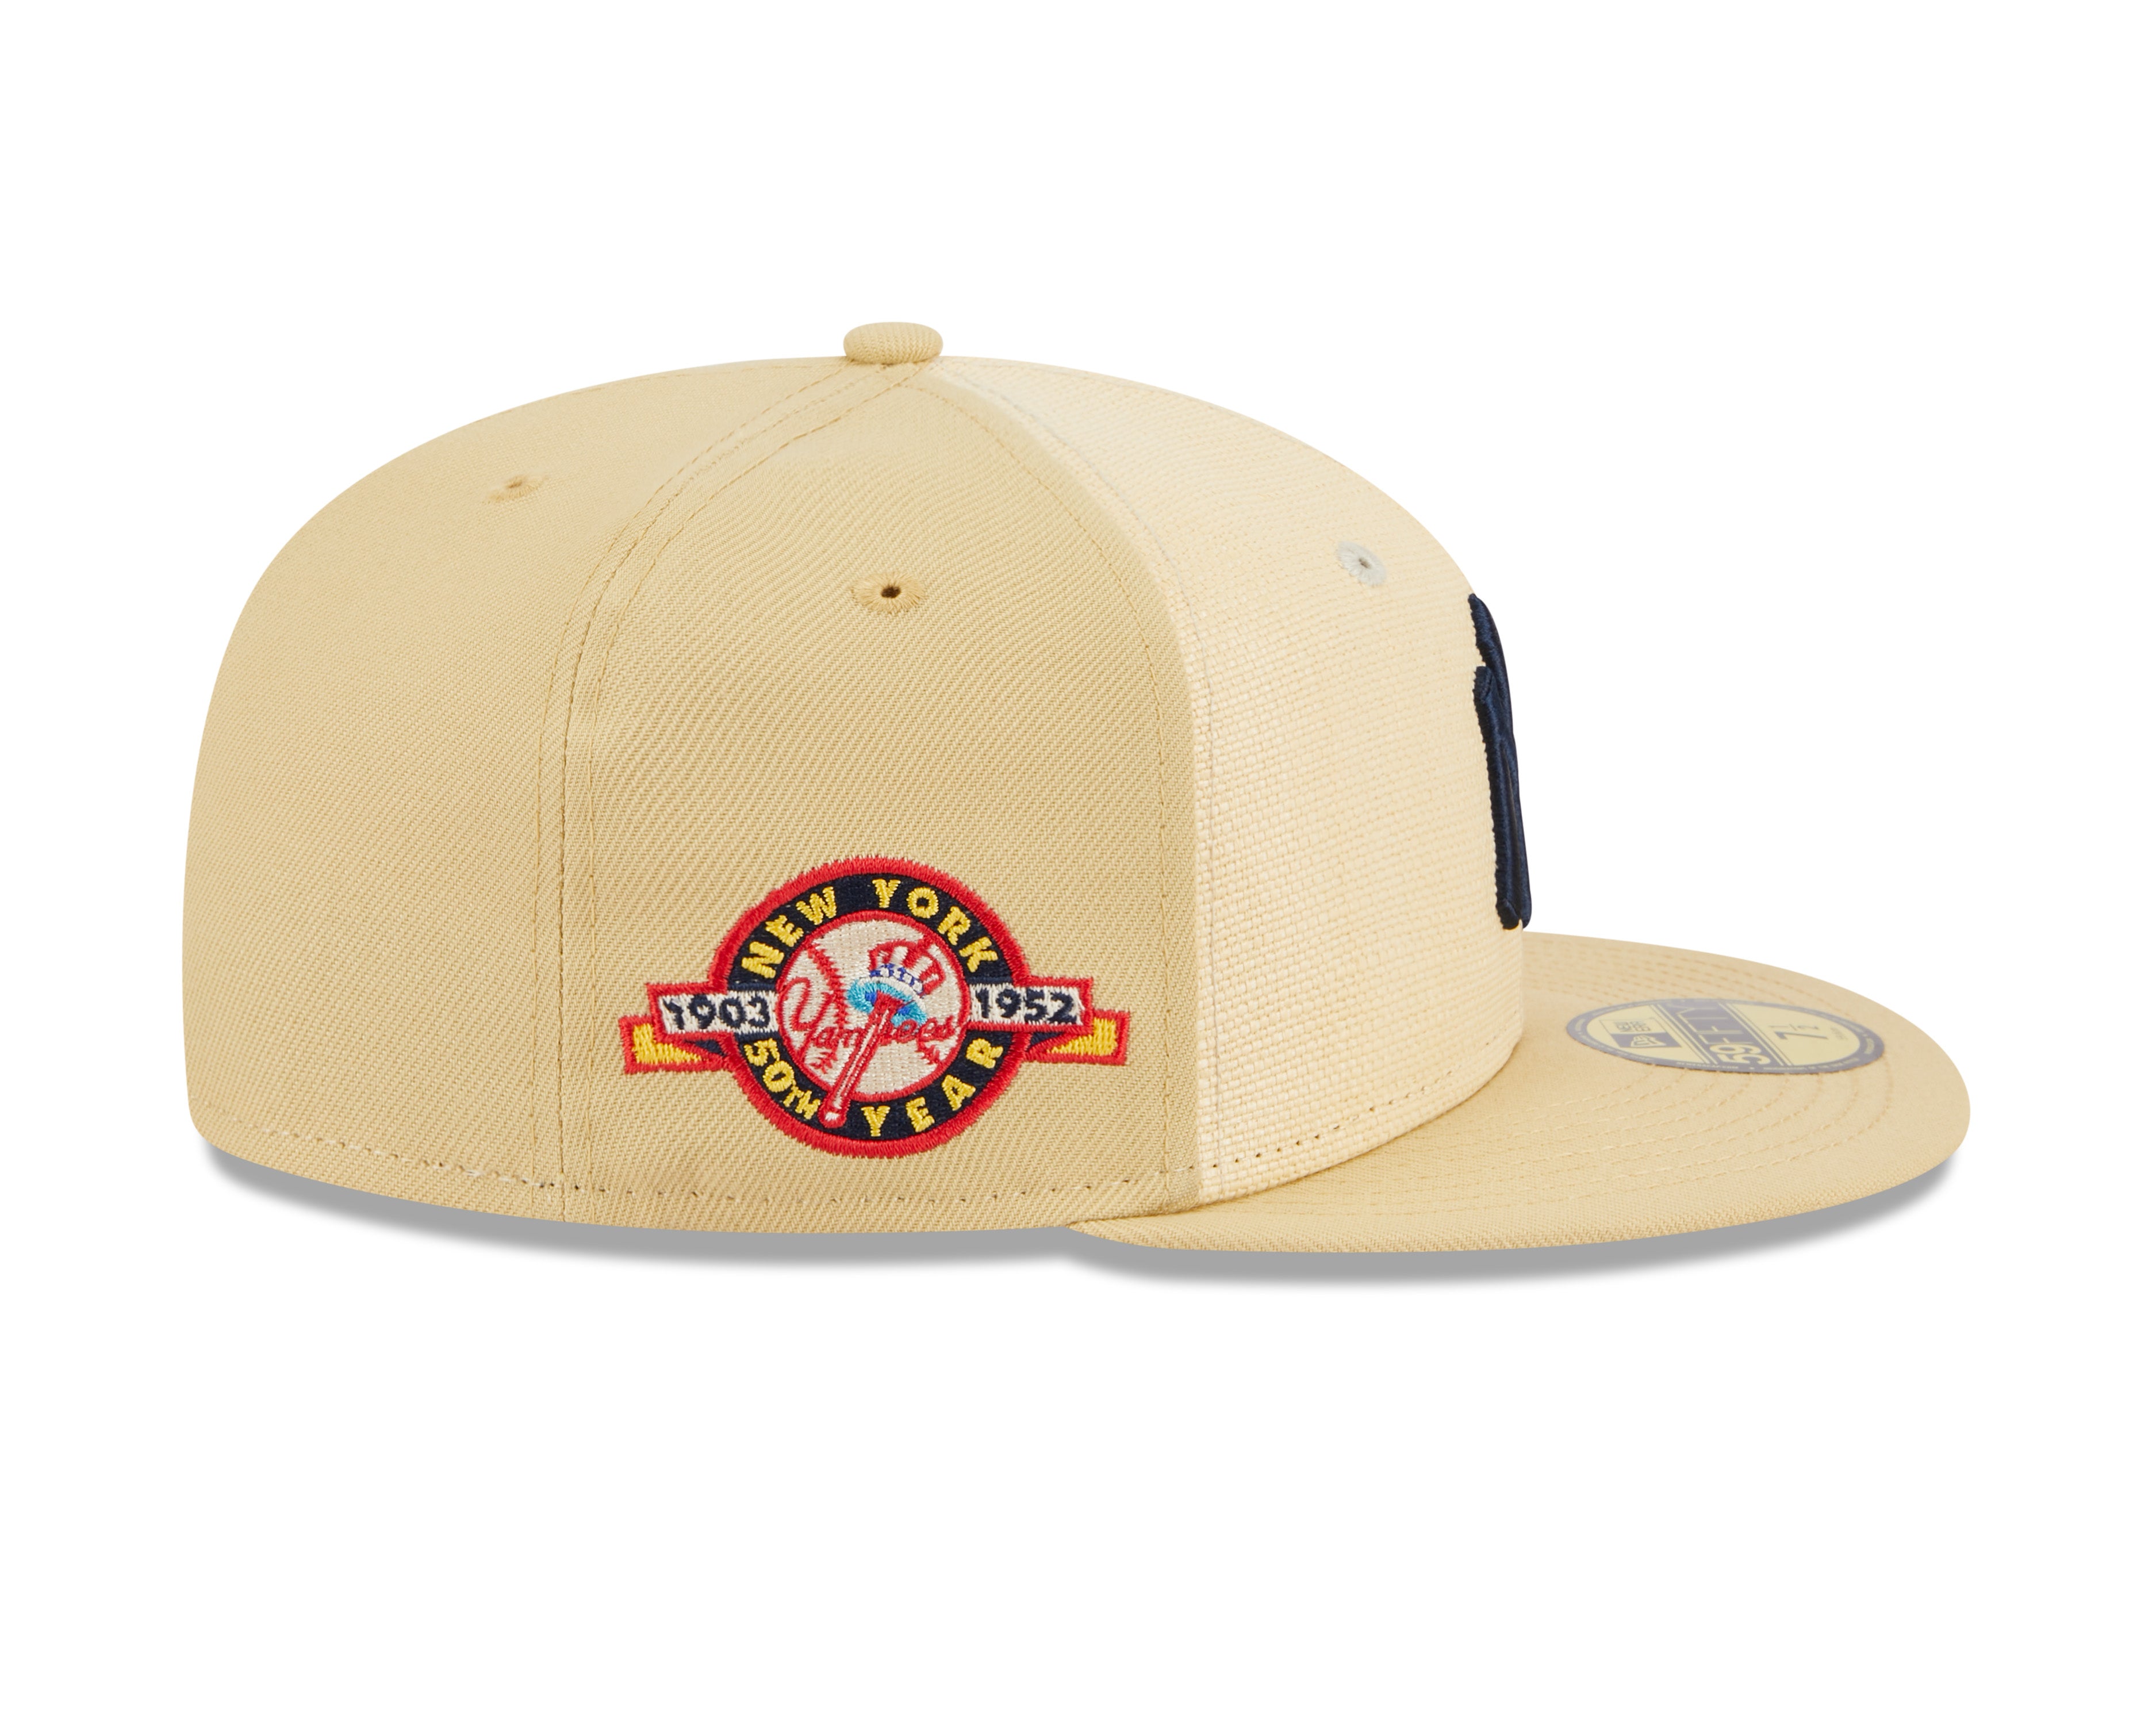 New Era - 59Fifty Fitted Cap - RAFFIA FRONT - New York Yankees - Sand - Headz Up 